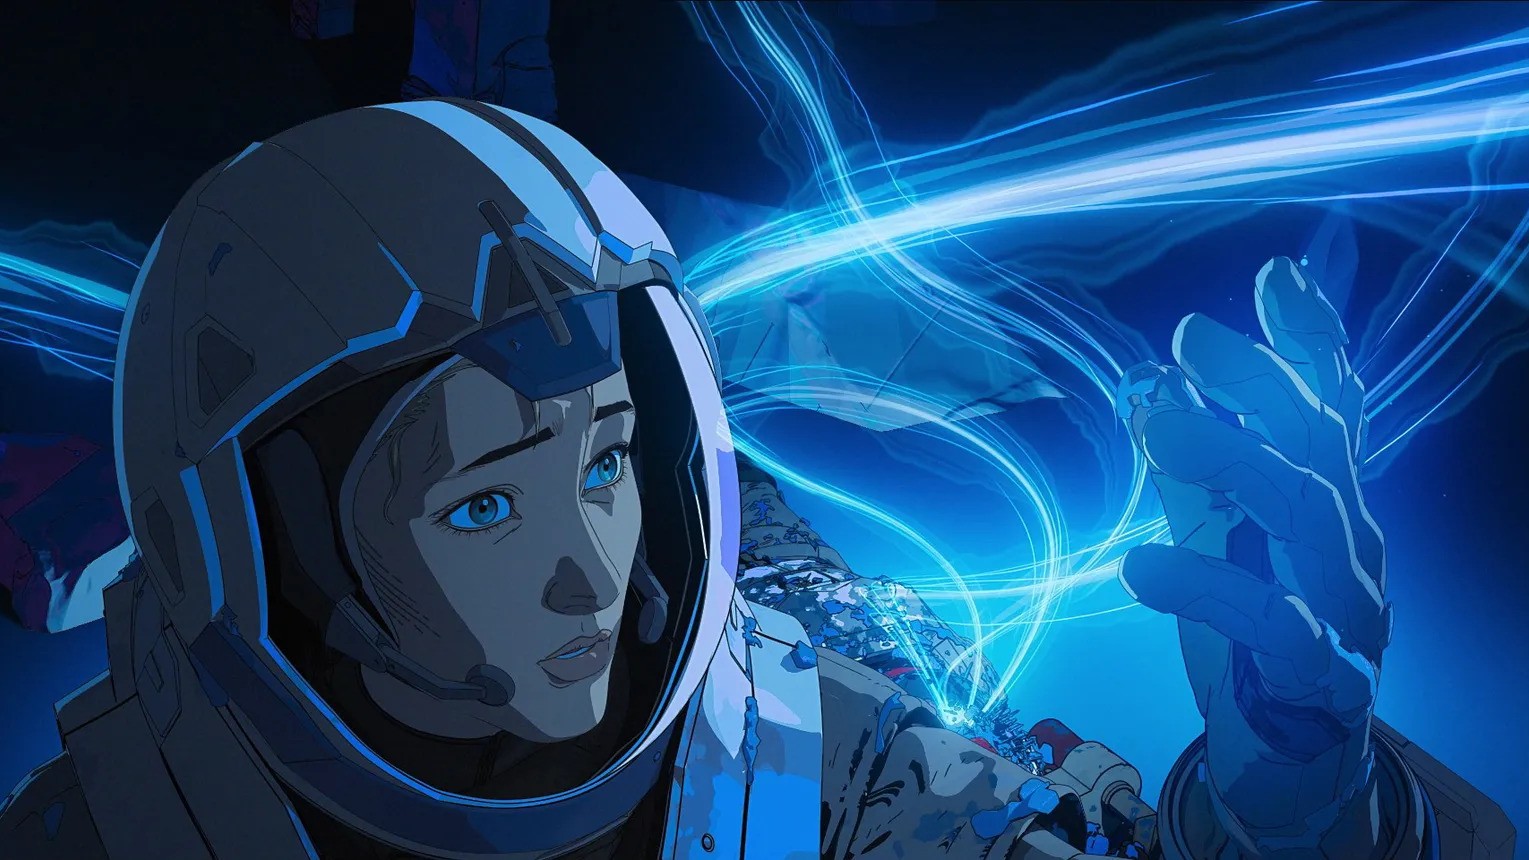 Screenshot from the animated tv series Love, Death & Robots. This still is from the episode The Very Pulse of the Machine. On the left we see a female astronaut staring at her hand. In the background is a celestial blue swirl.